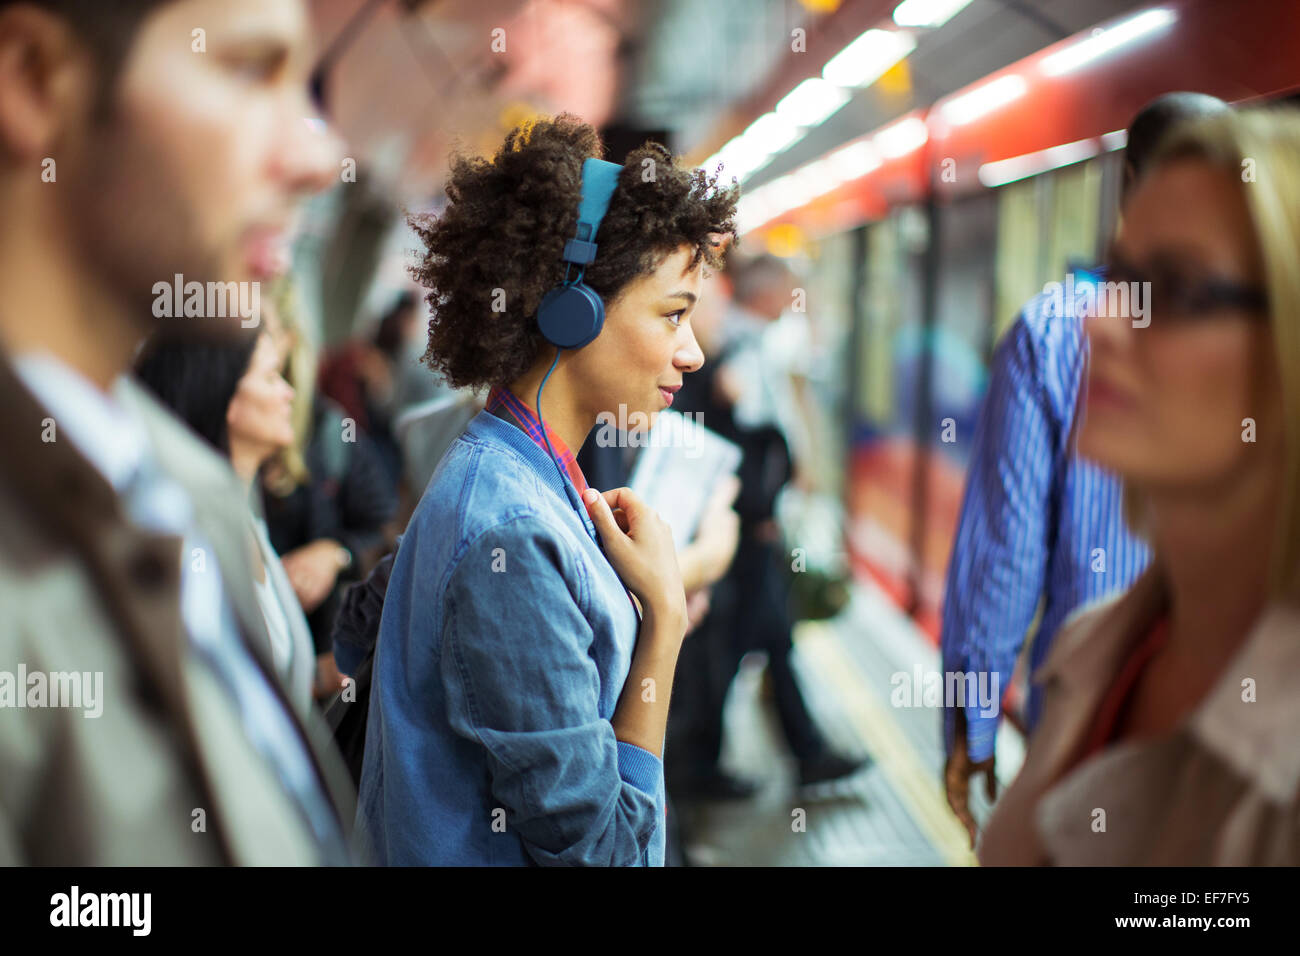 Woman listening to headphones in train station Stock Photo